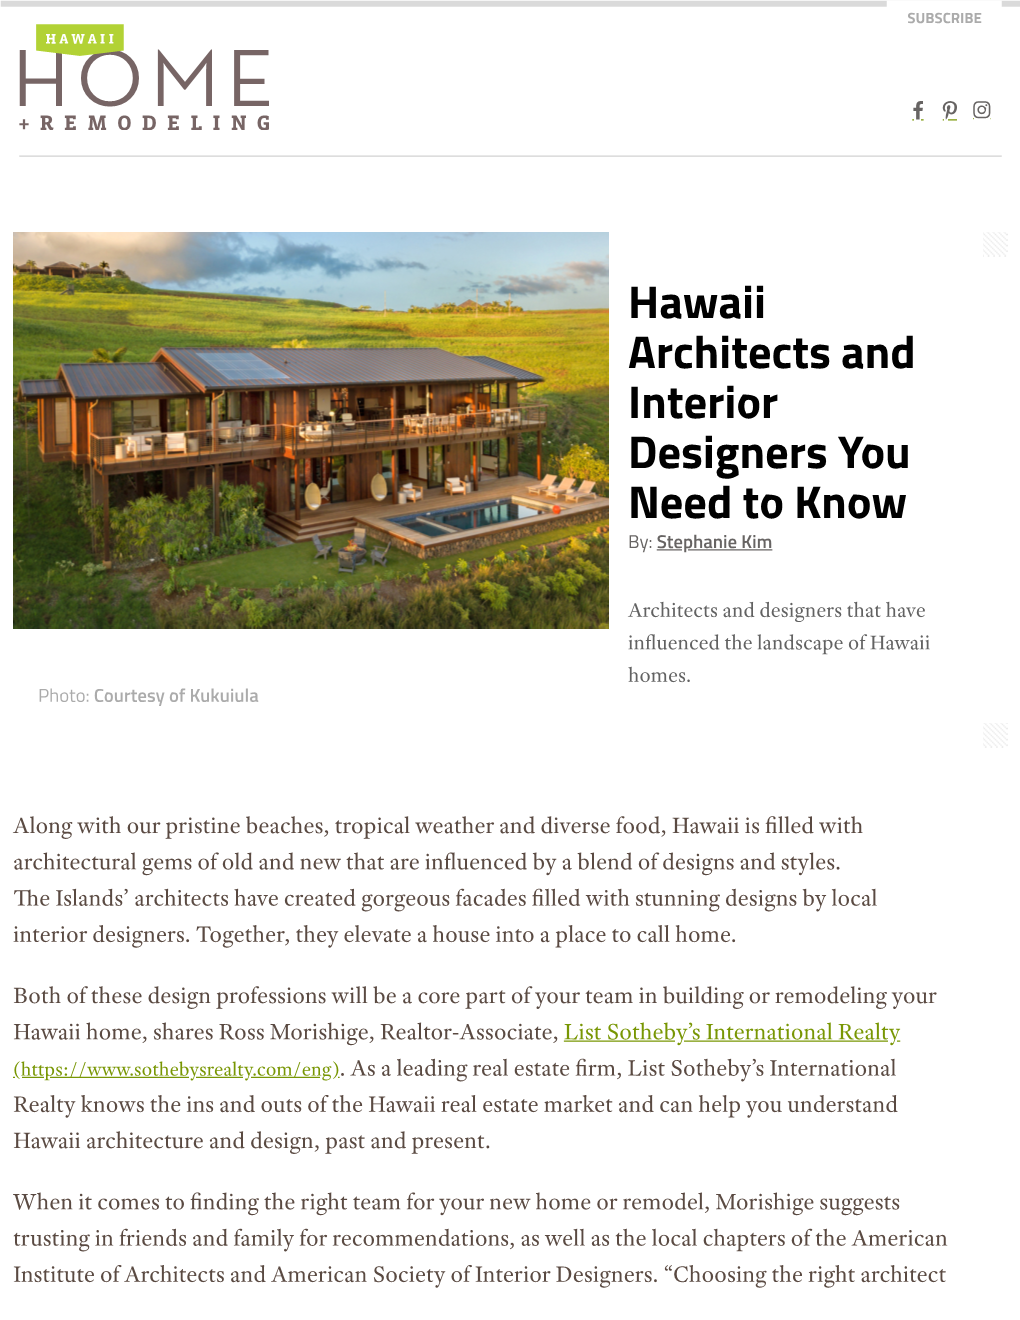 Hawaii Architects and Interior Designers You Need to Know By: Stephanie Kim